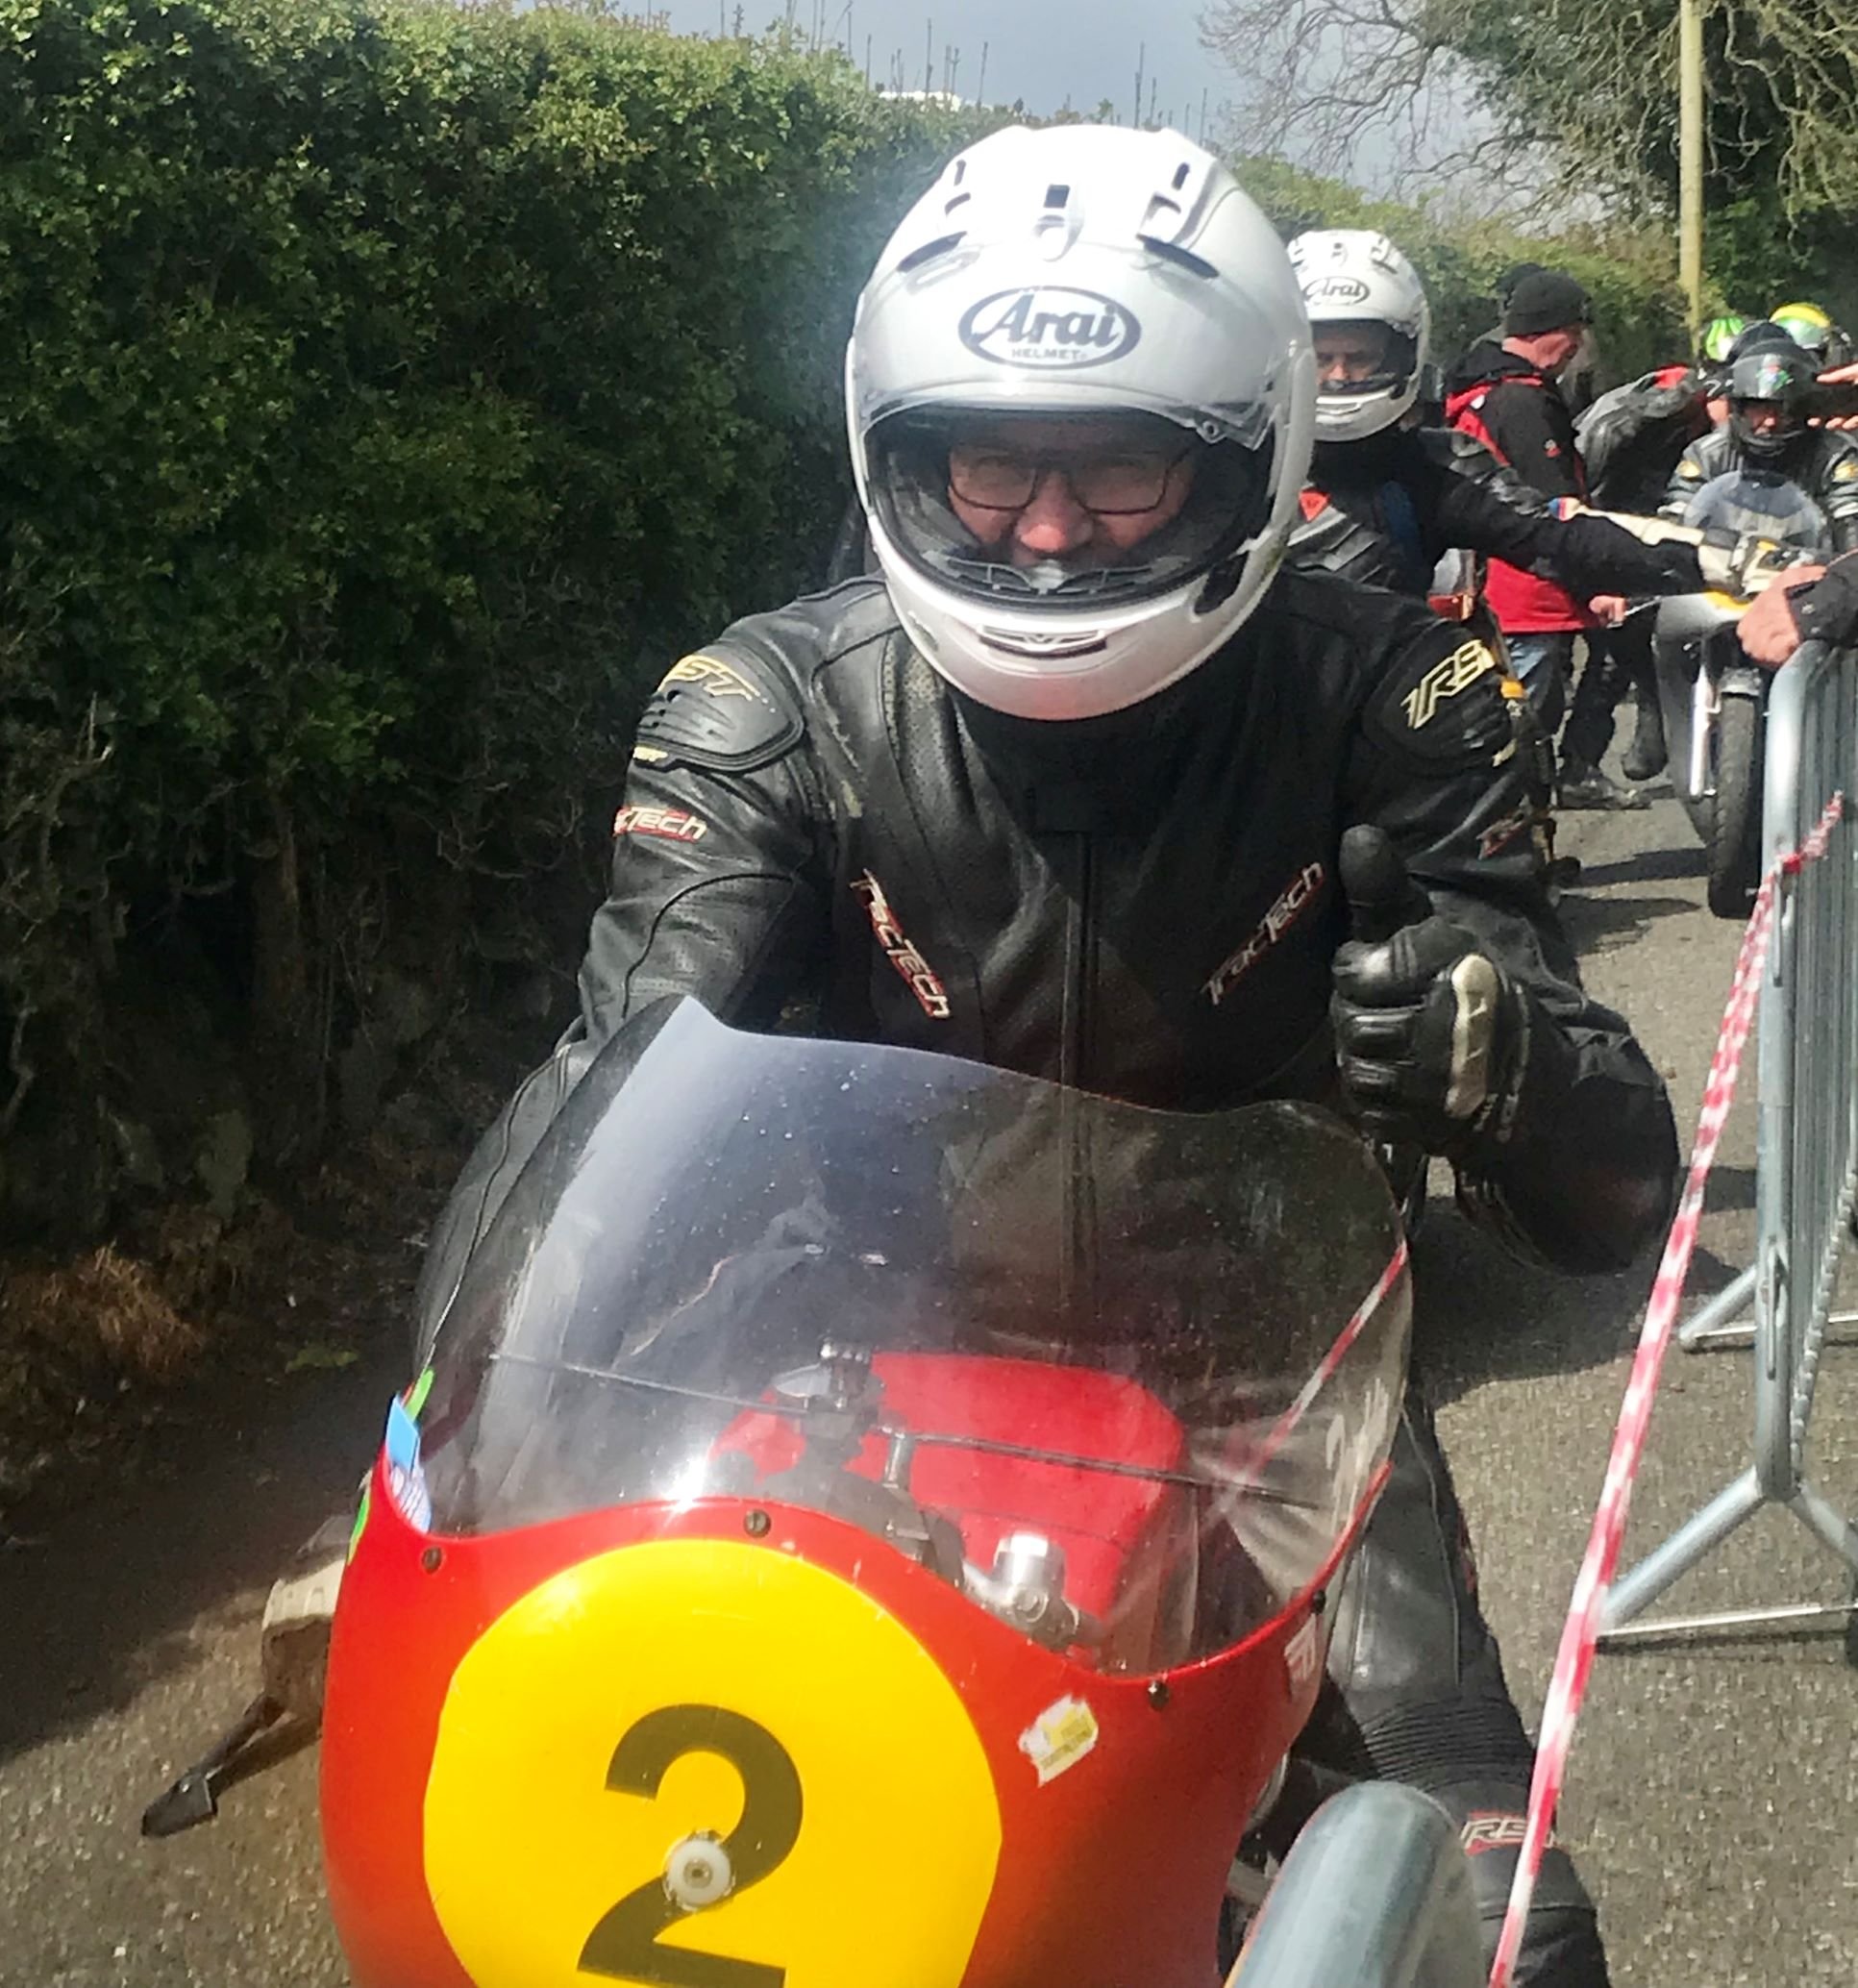 Cookstown 100 Classic Round Up